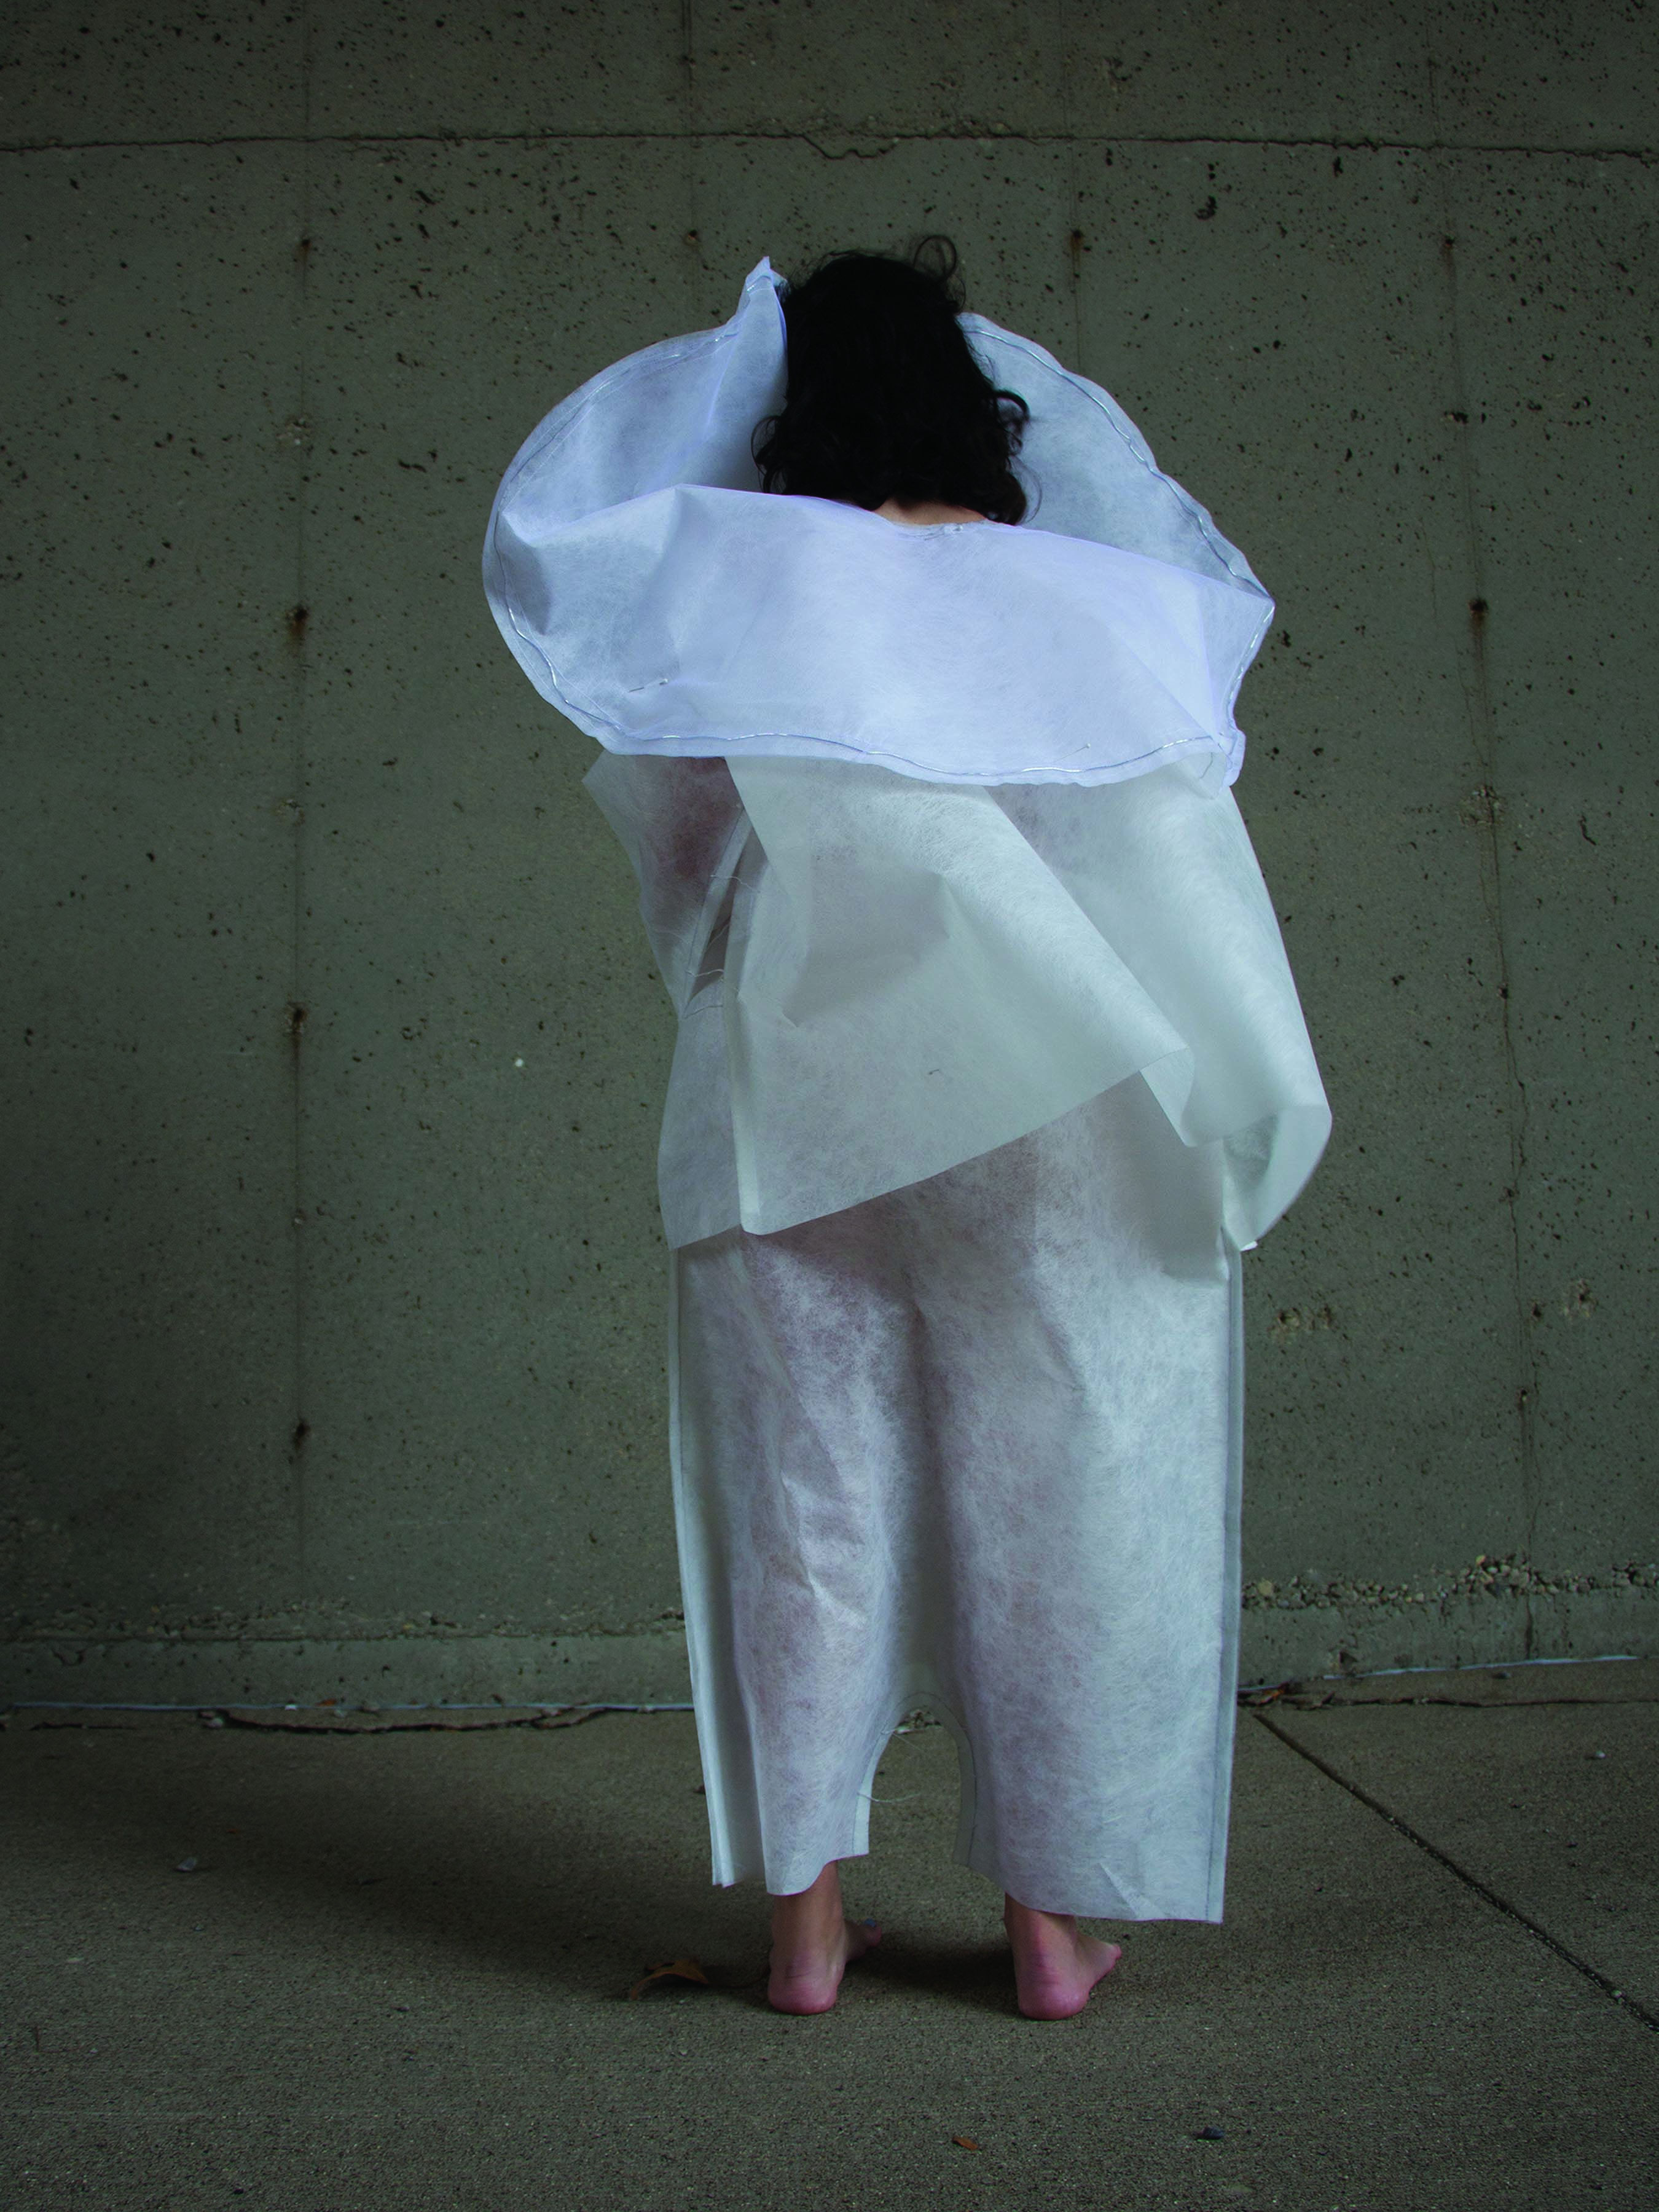 Figures 3-4: Unisuit by Margy Groshong (BDes, Fashion Design), 2016. Unisuit proposes an embrace of homogeneous external appearances, favoring what happens uniquely within the human mind. In an age of explosive research and discovery in neuroscience, it suggests a society so focused on the value and functions of the brain that other forms of human ability are intentionally limited. Walking, use of hands, and vision of the wearer are all obstructed while face and body shape are hidden. Only the top and back of the head are revealed — an indication that the brain is coveted. From the theme “Yearning for an Authentic Self” in the exhibition Dread & Desire: Urban Futures at the Scale of the Human Body.